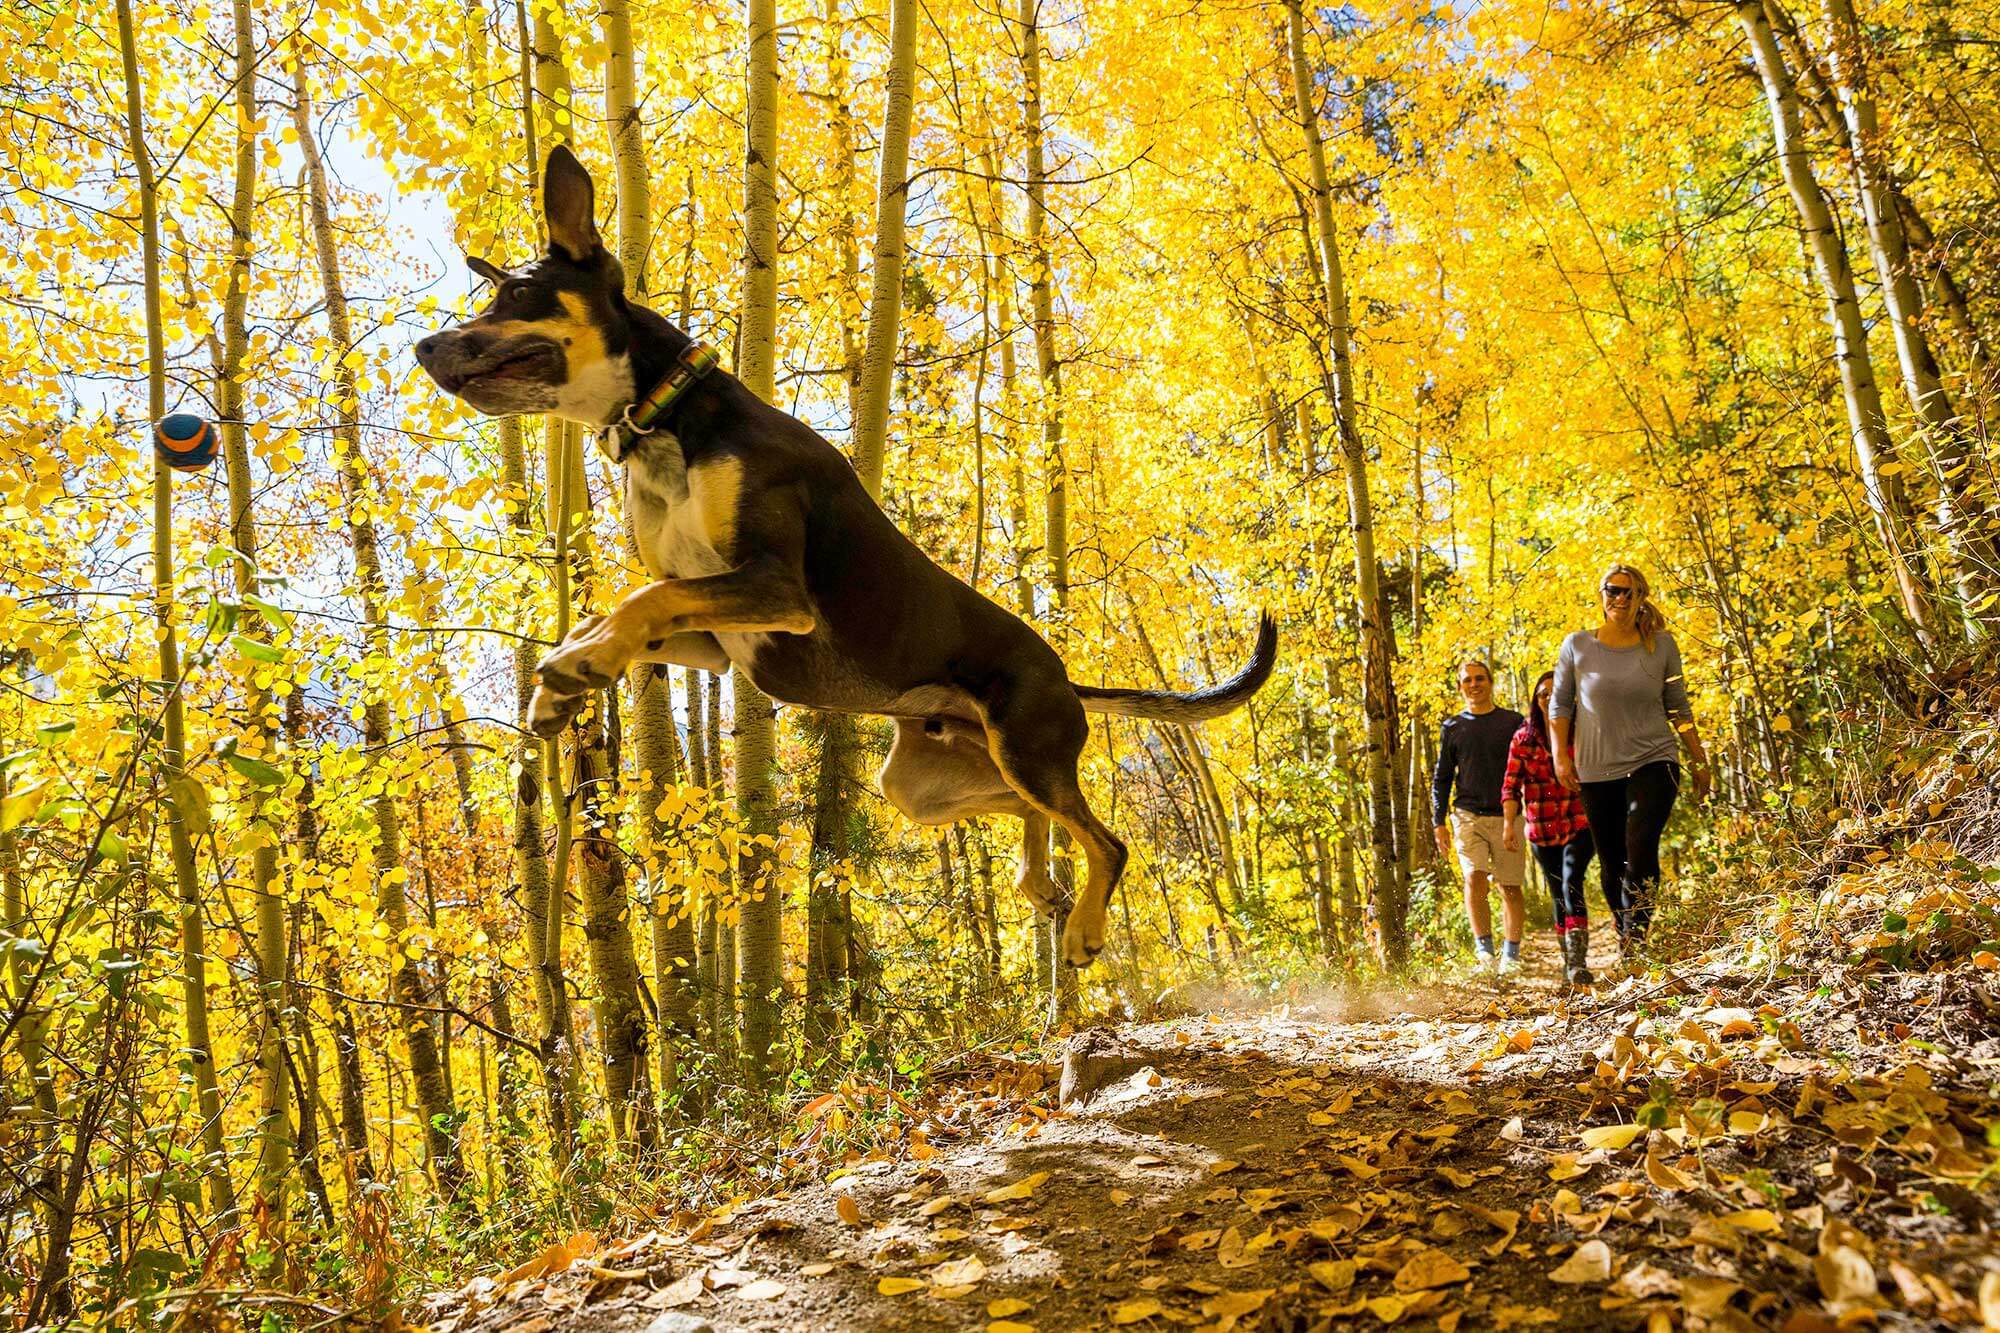 Dog chases ball with group of hikers surrounded by golden aspens in Breckenridge, CO